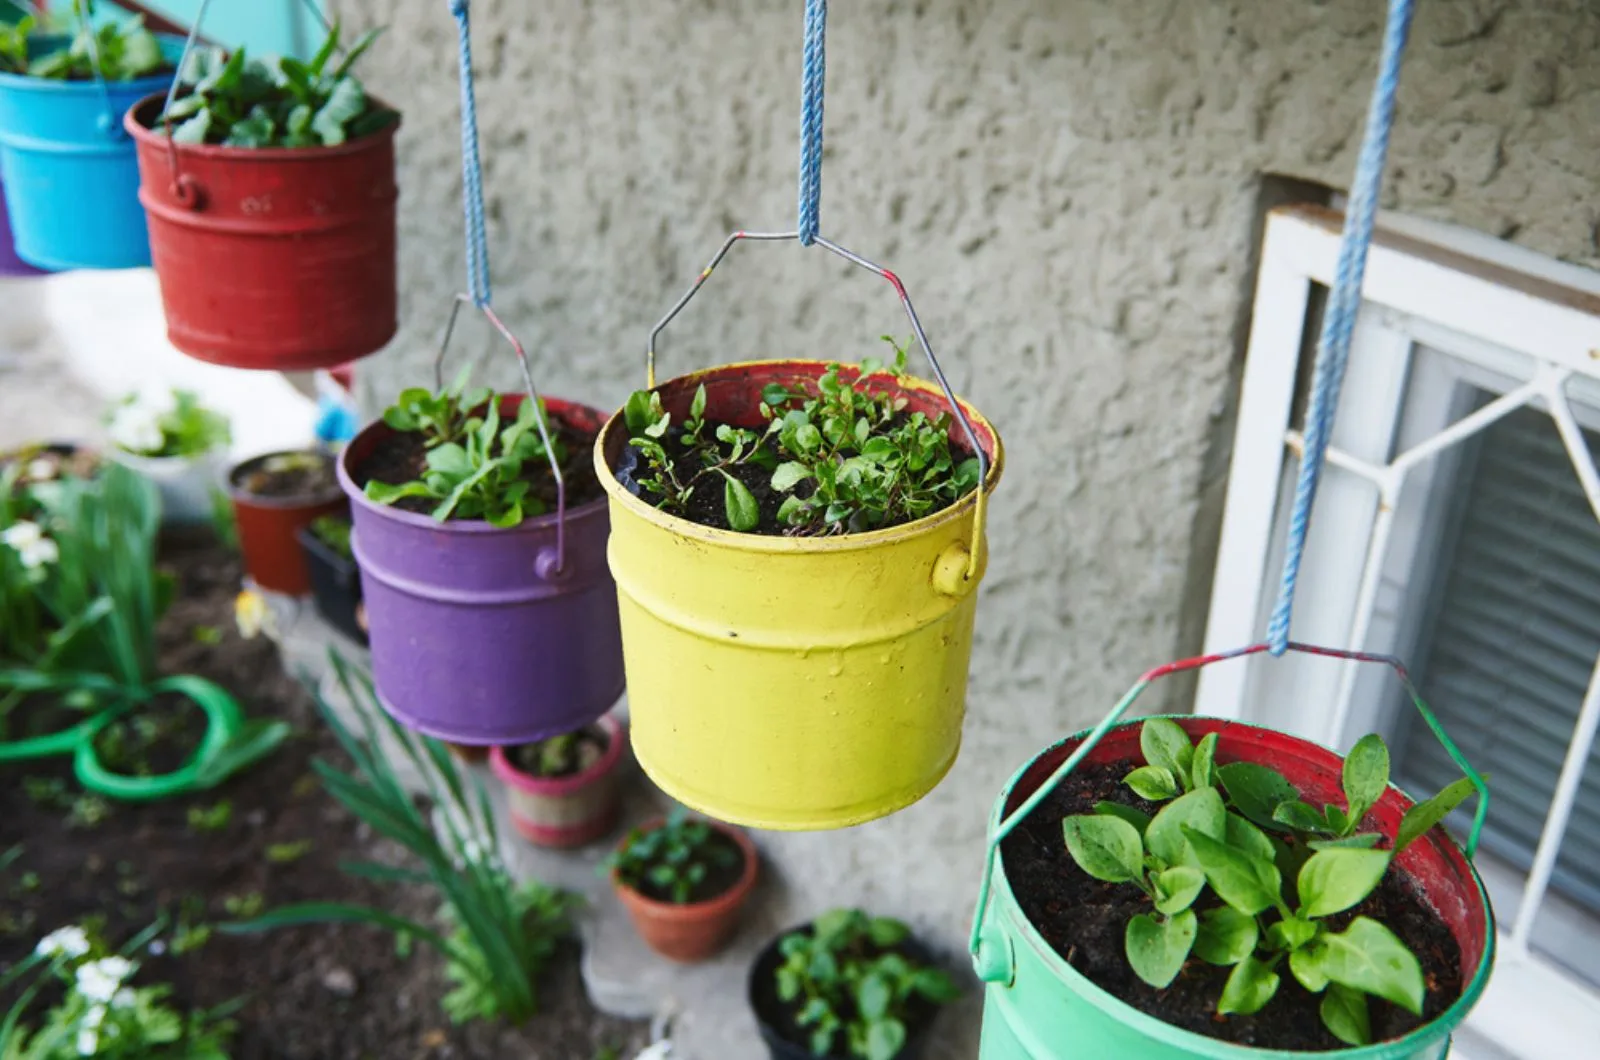 Grown culinary herbs in hanging colored metal buckets